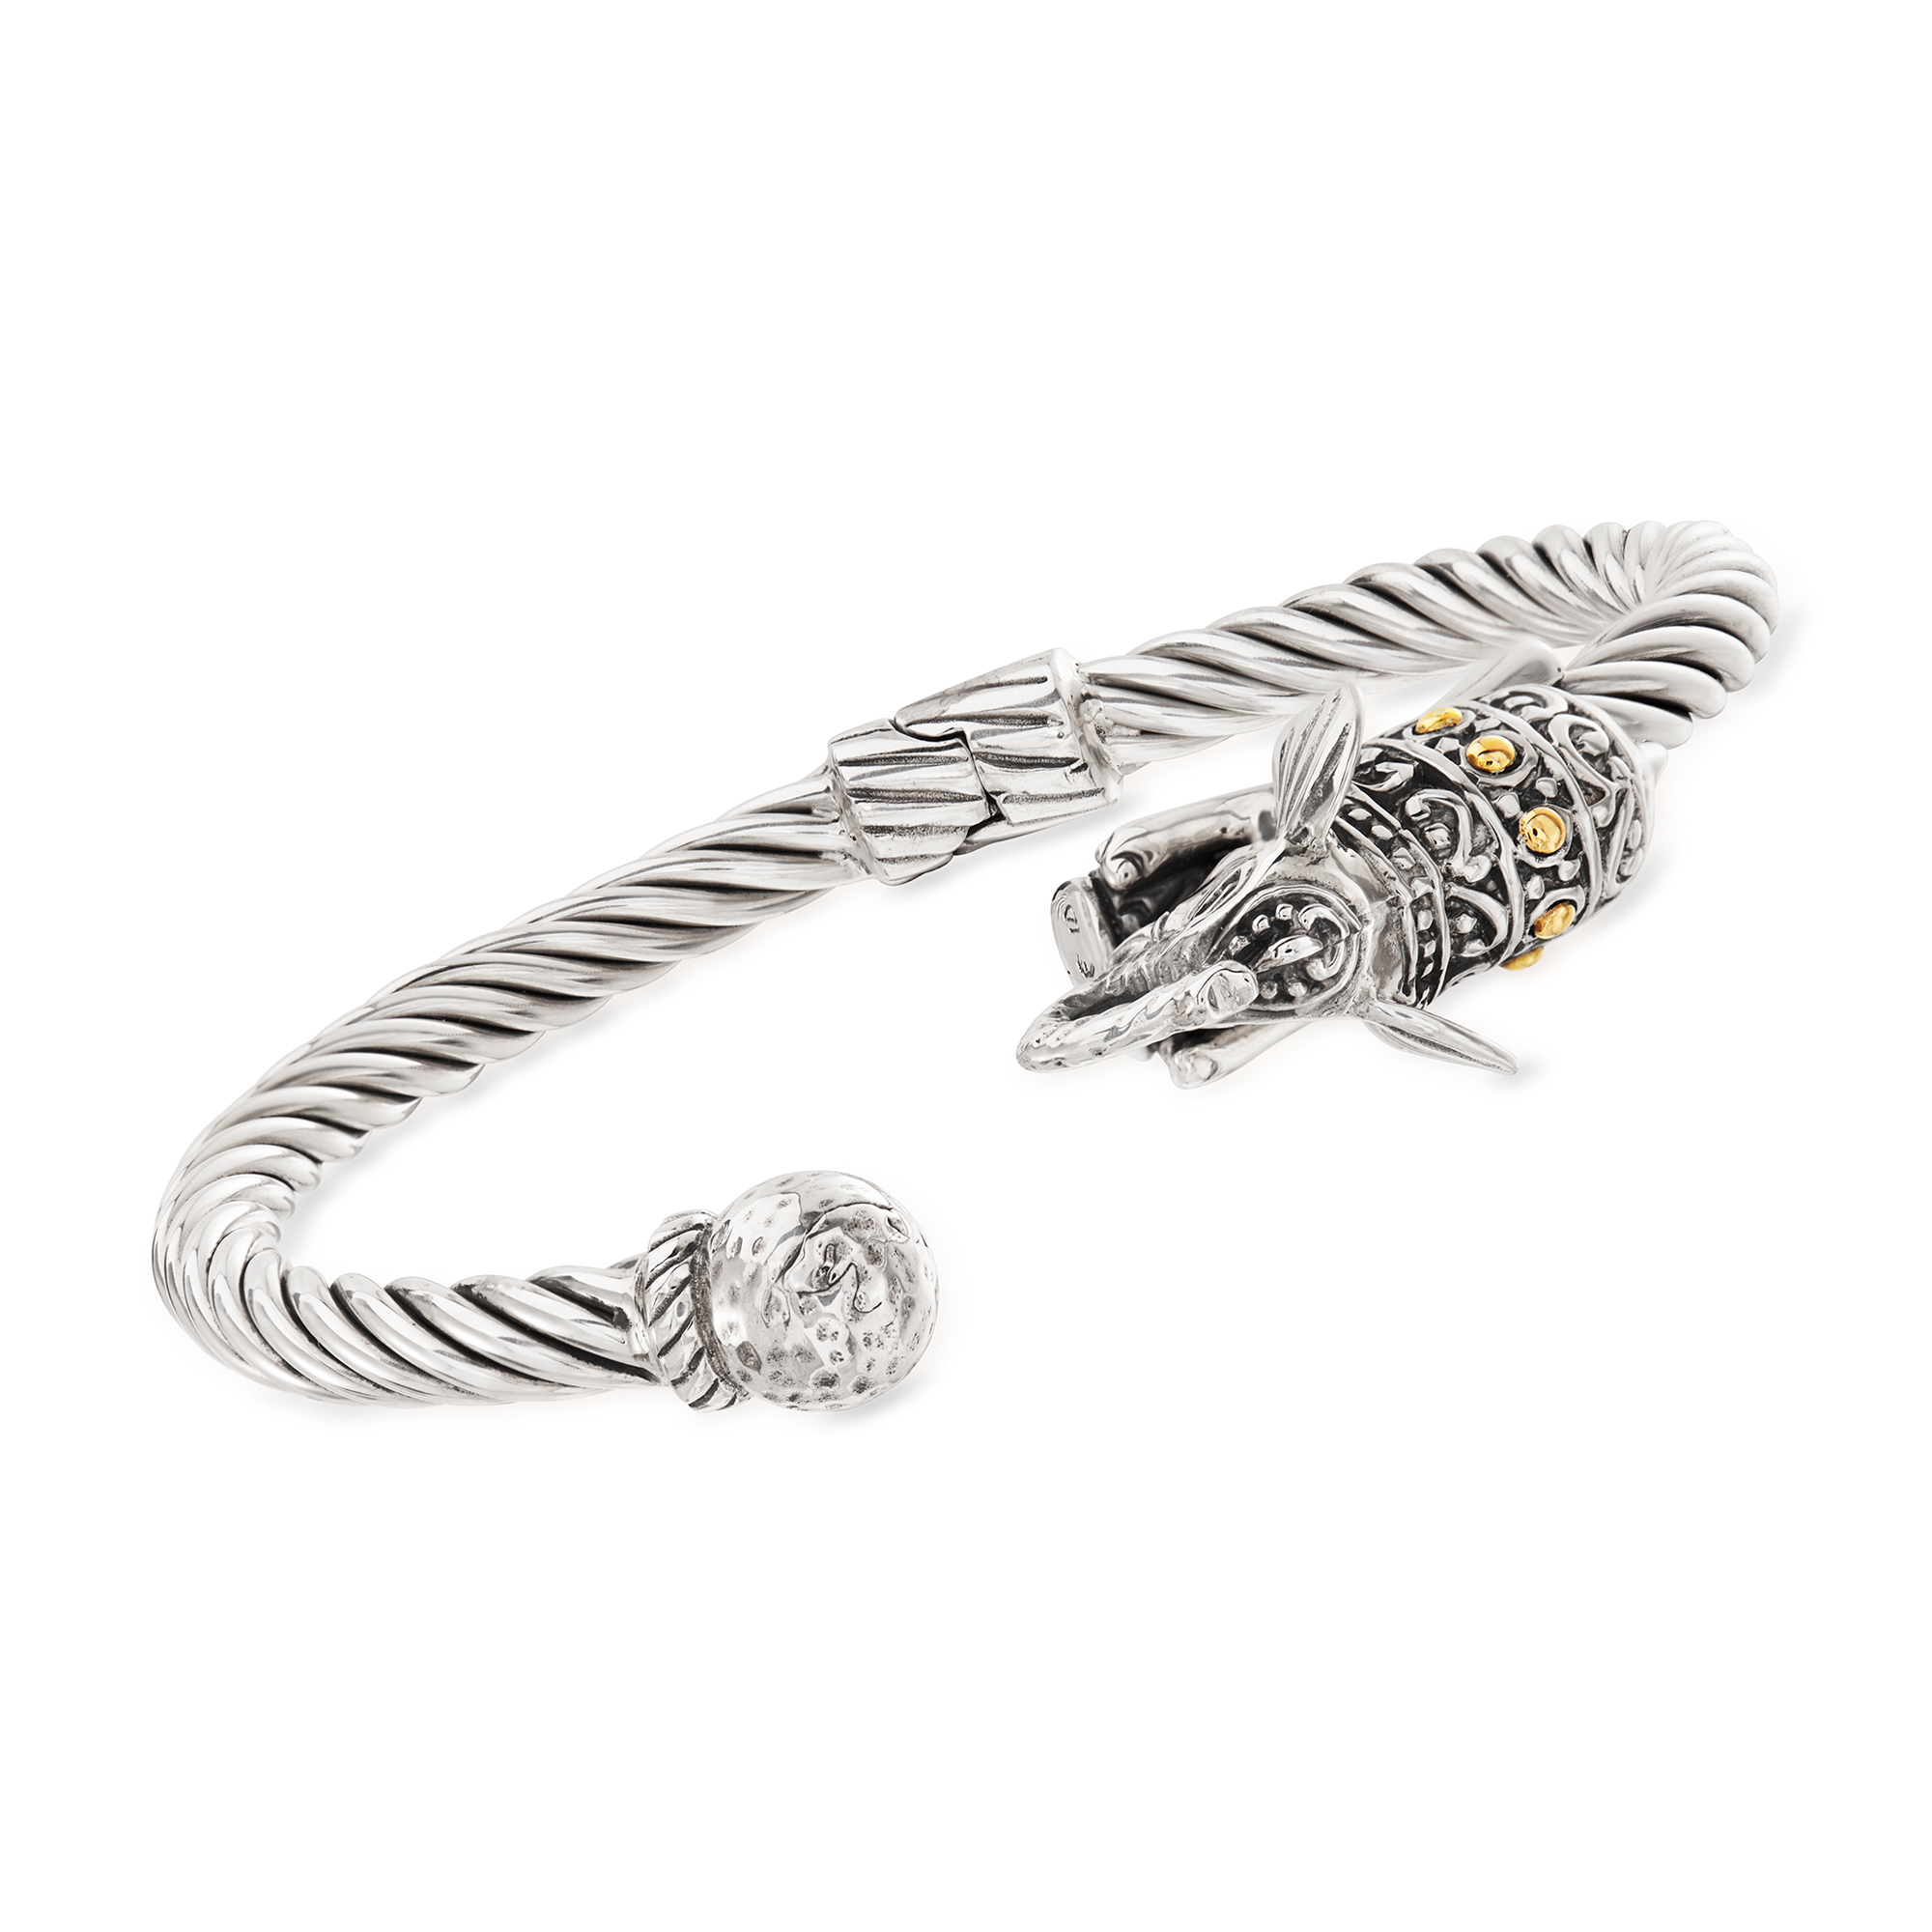 Sterling Silver Bali-Style Elephant Bangle Bracelet with 18kt Yellow 